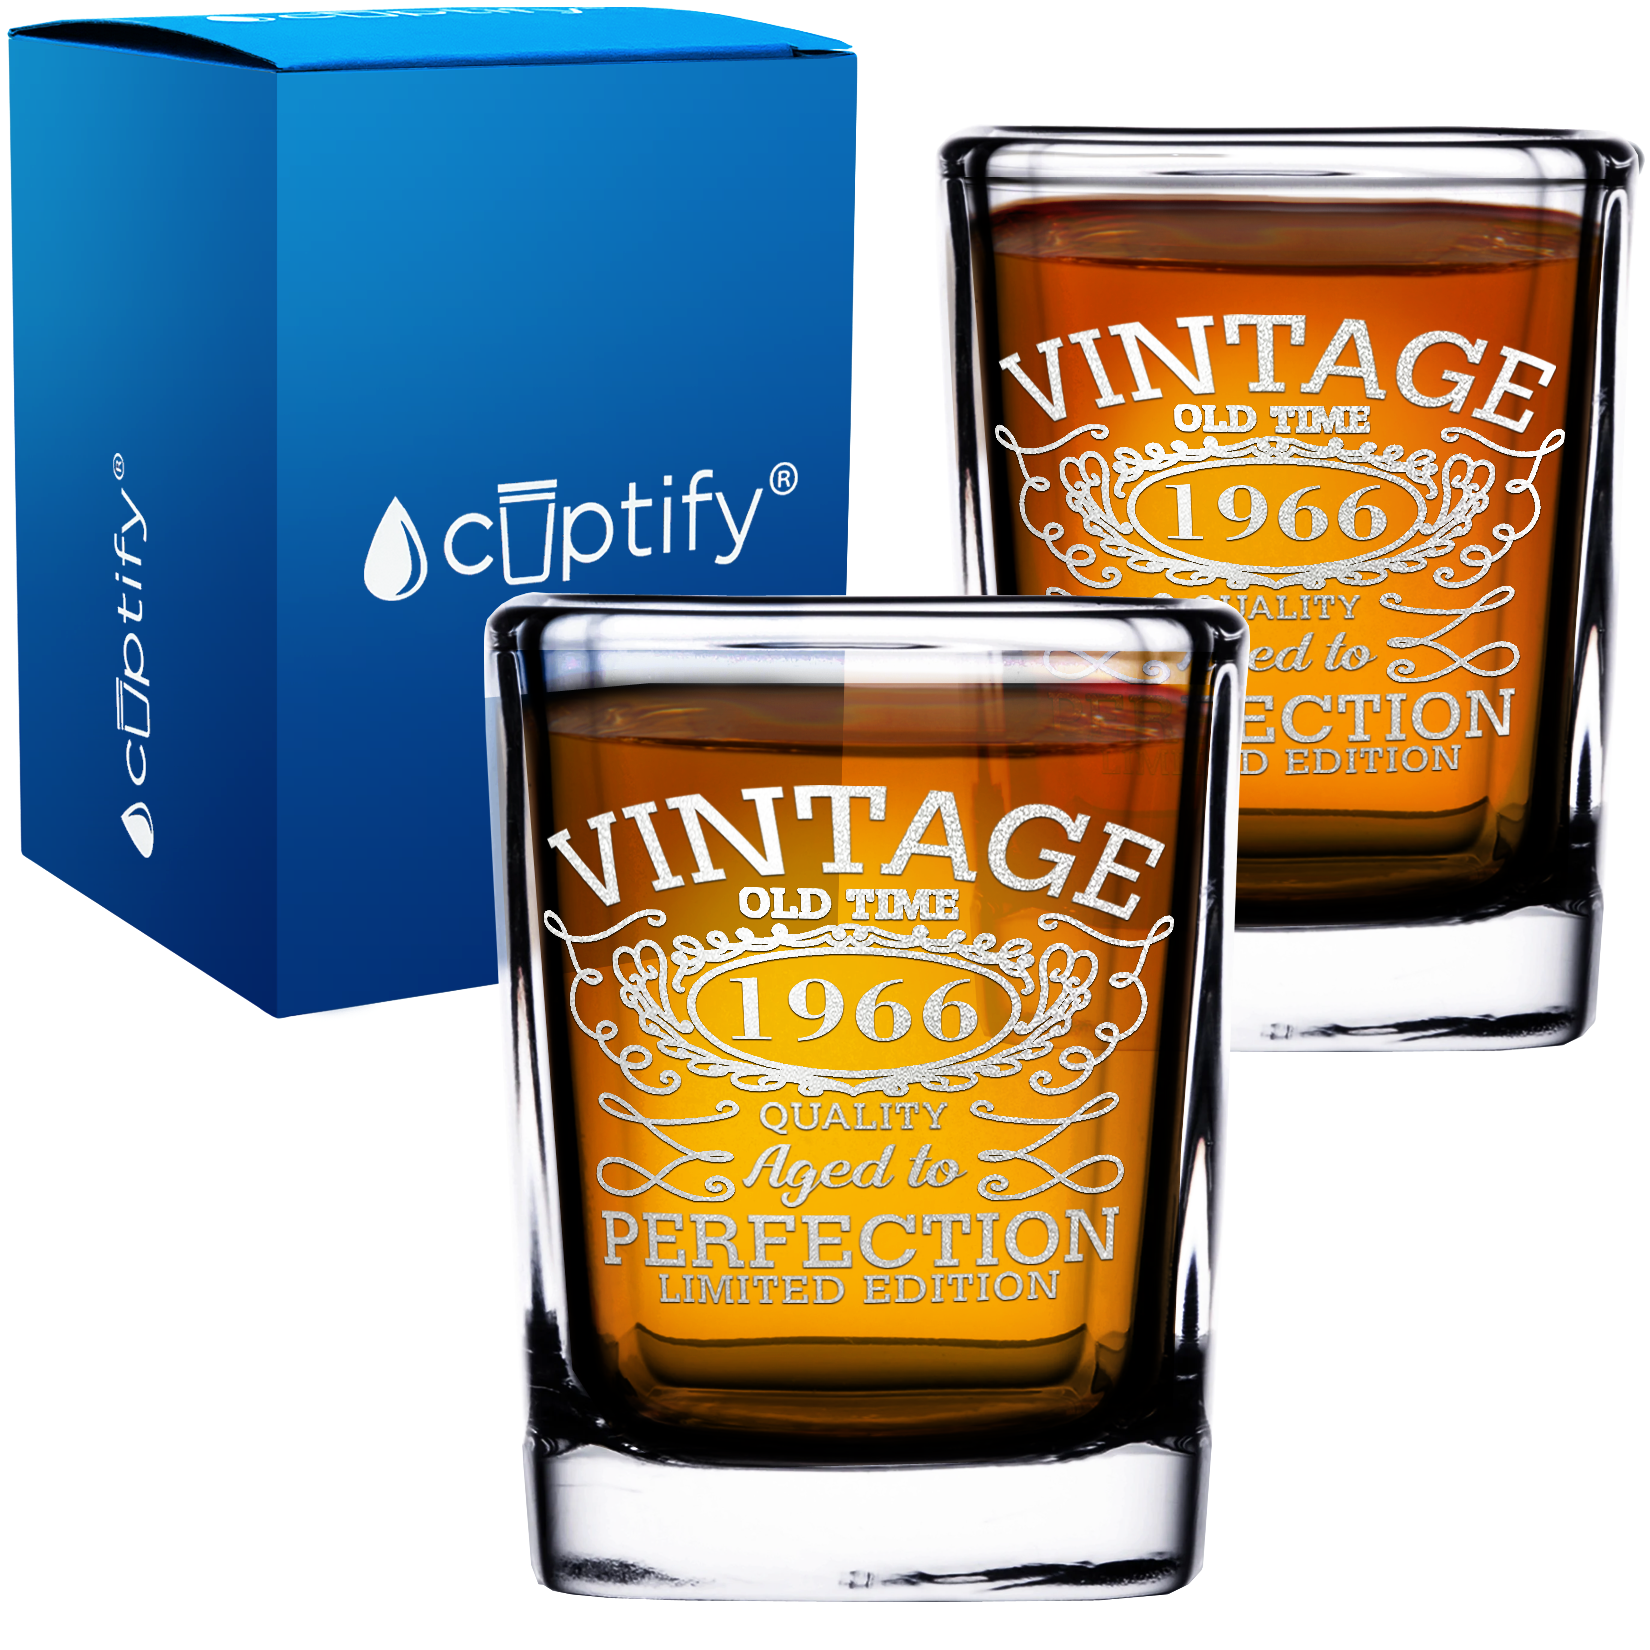 56th Birthday Vintage 56 Years Old Time 1966 Quality 2oz Square Shot Glasses - Set of 2